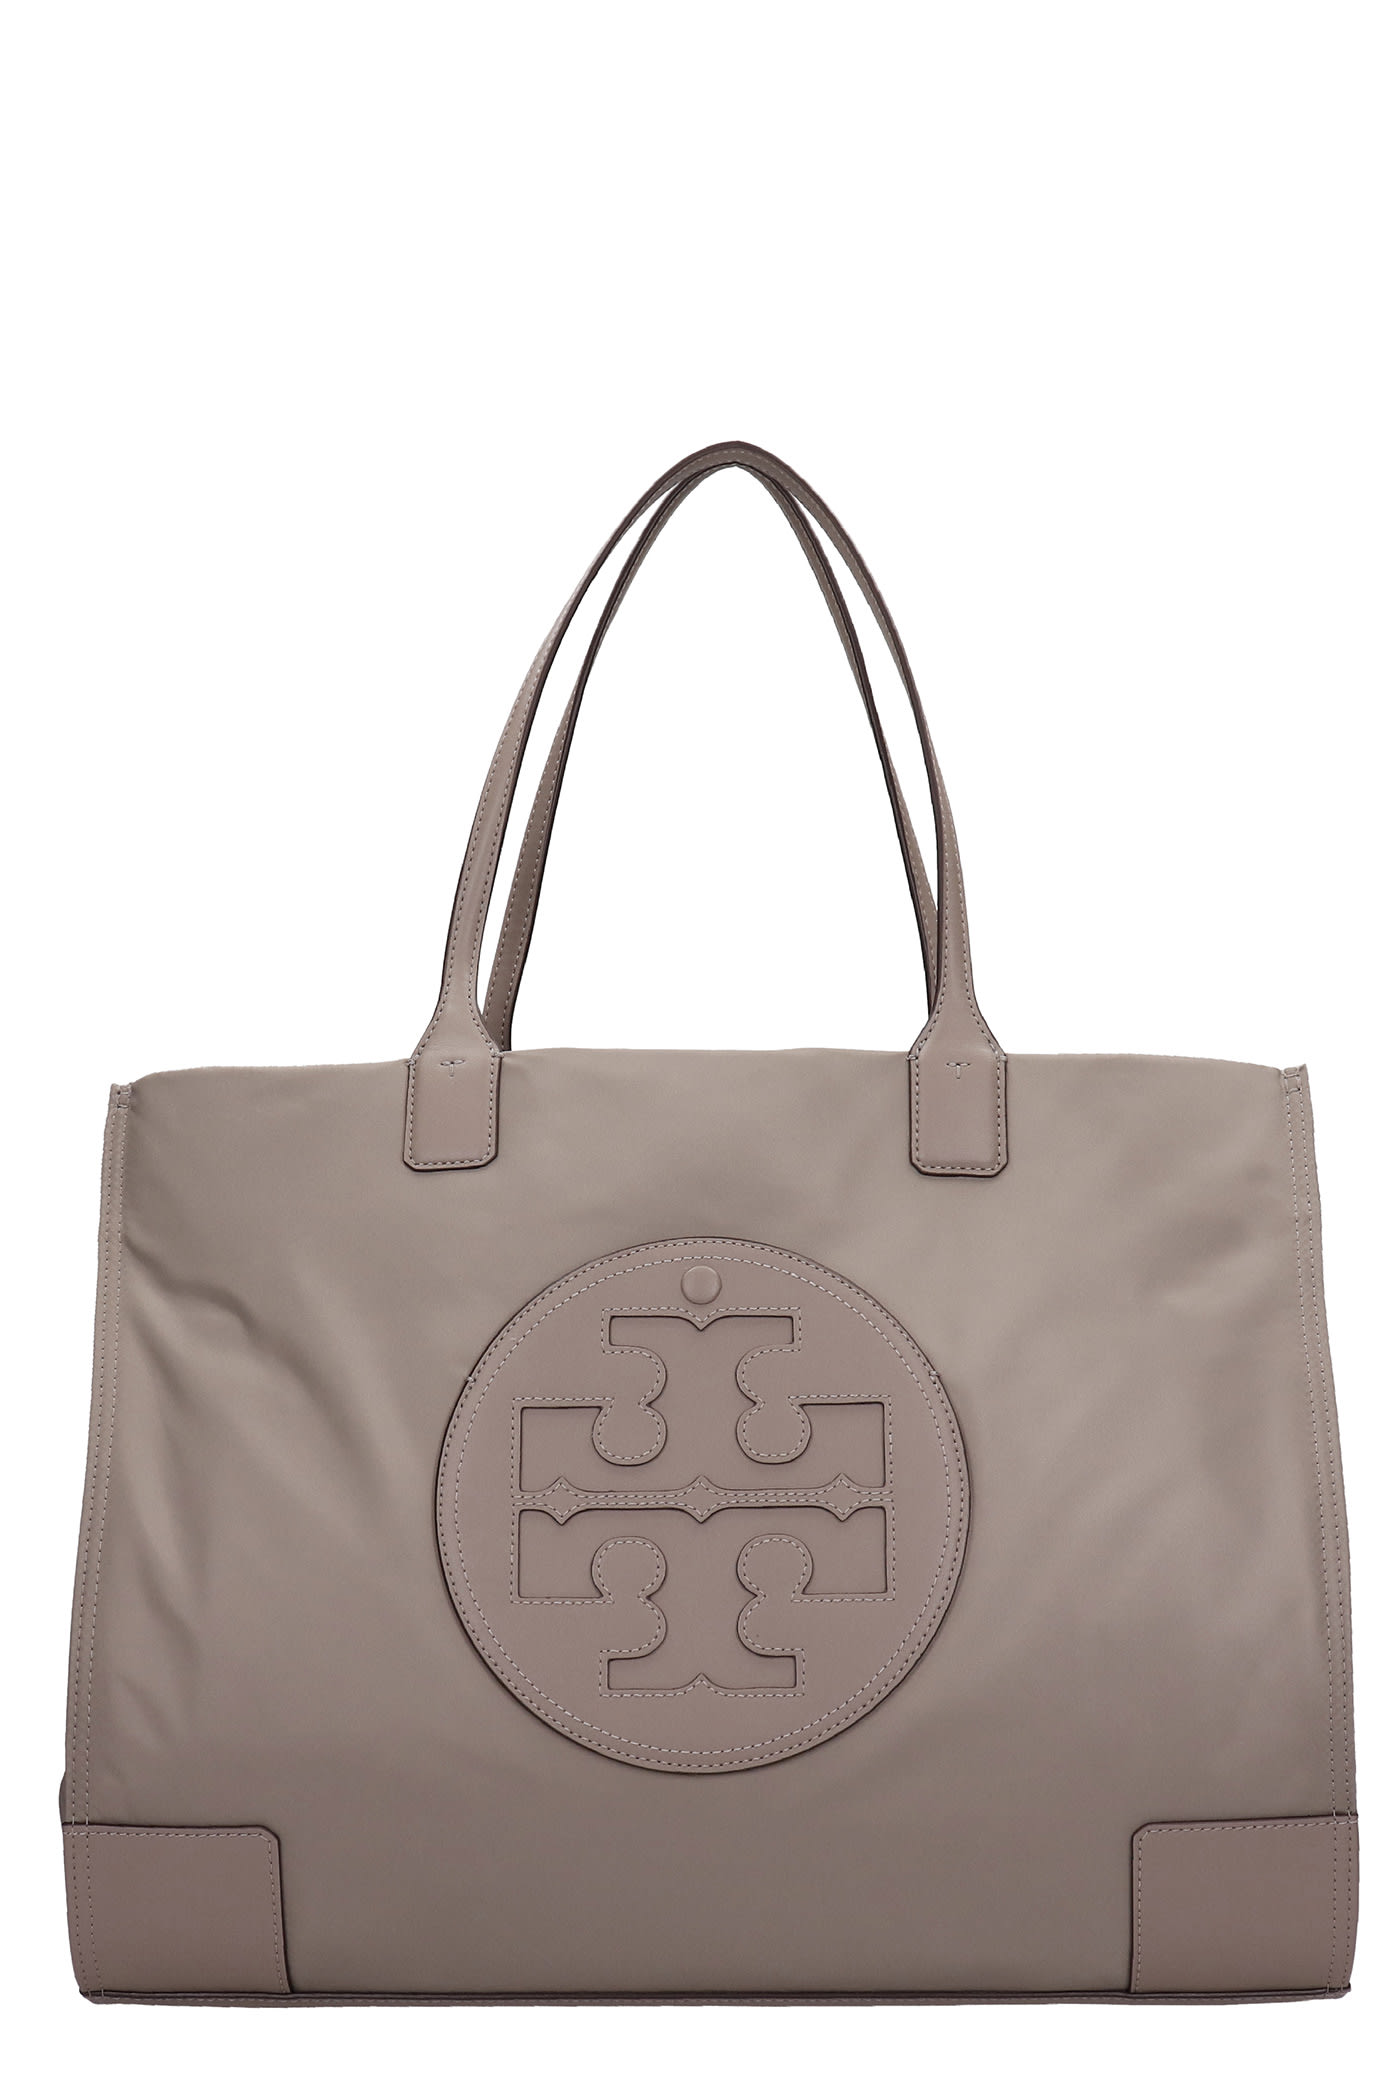 Tory Burch Ella Tote In Taupe Leather